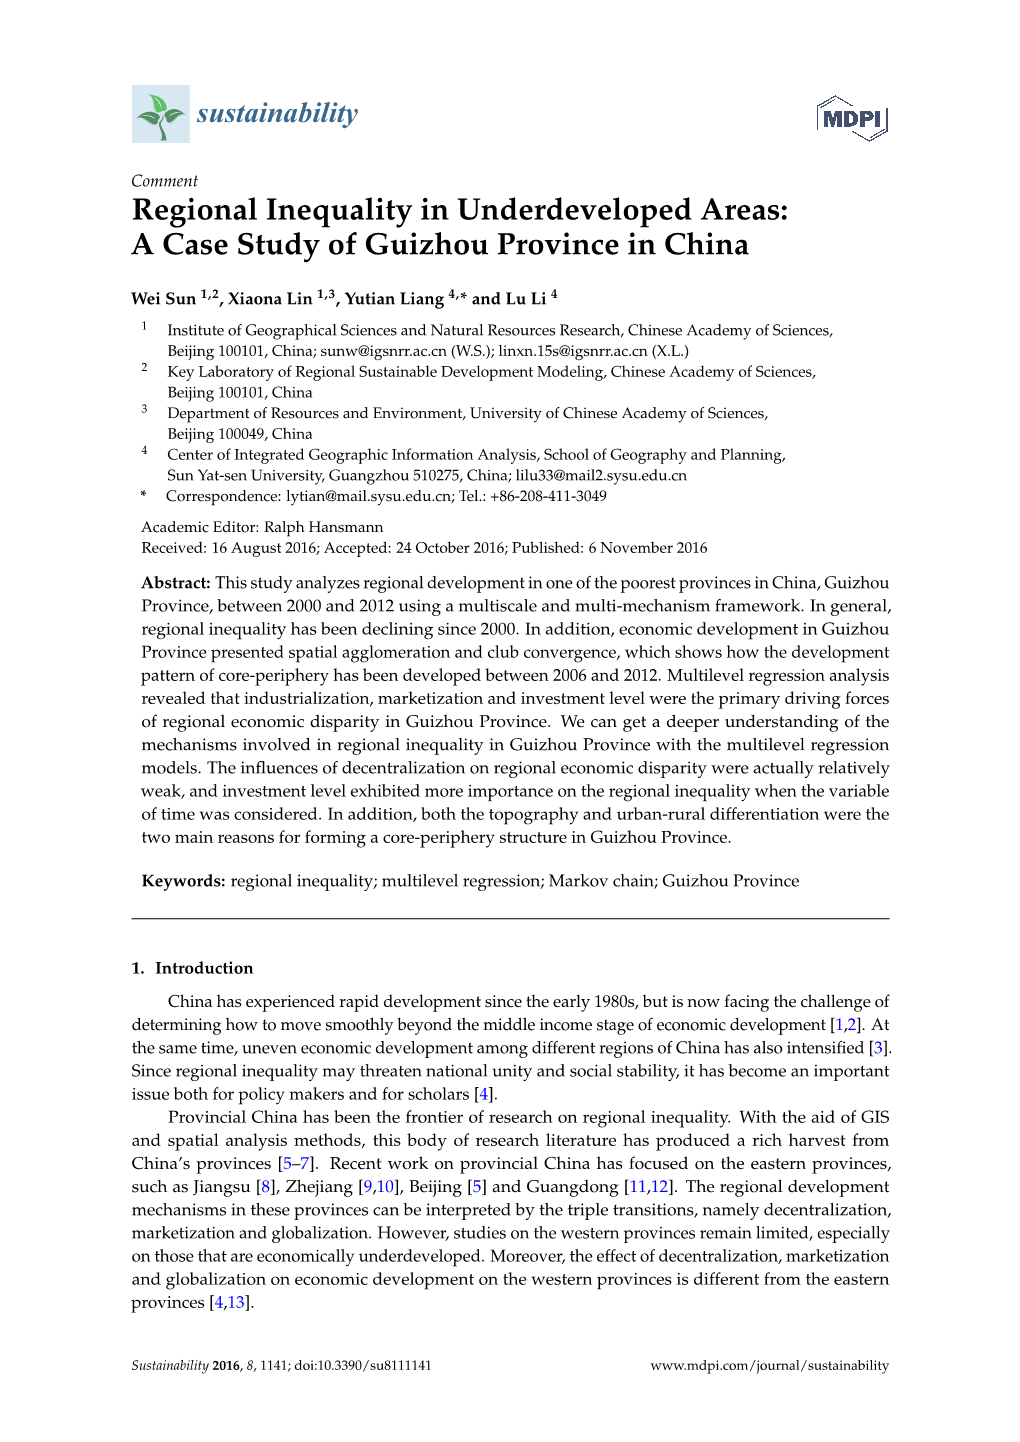 Regional Inequality in Underdeveloped Areas: a Case Study of Guizhou Province in China